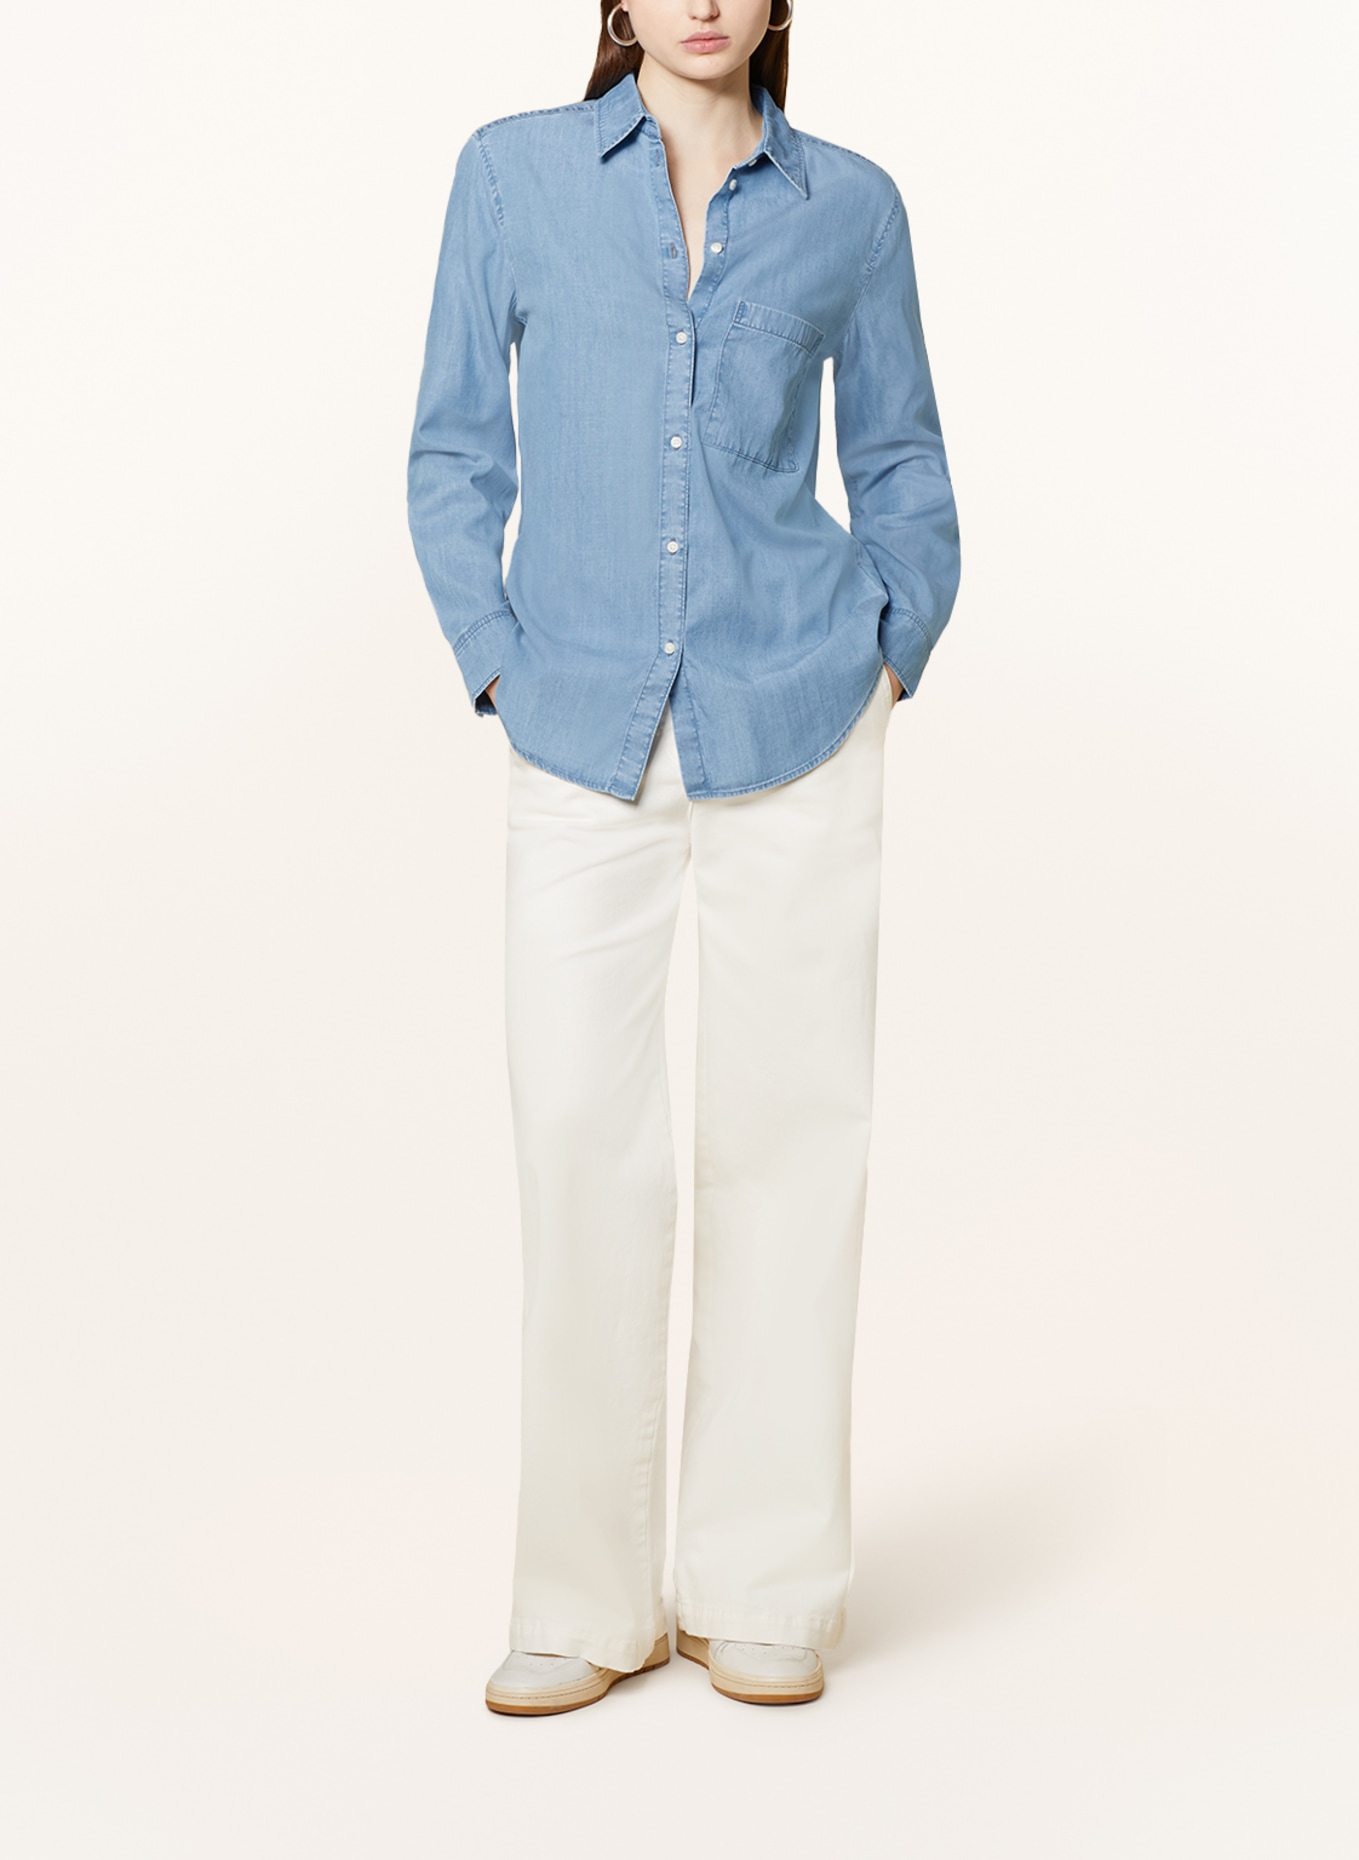 Marc O'Polo Shirt blouse in denim look, Color: LIGHT BLUE (Image 2)